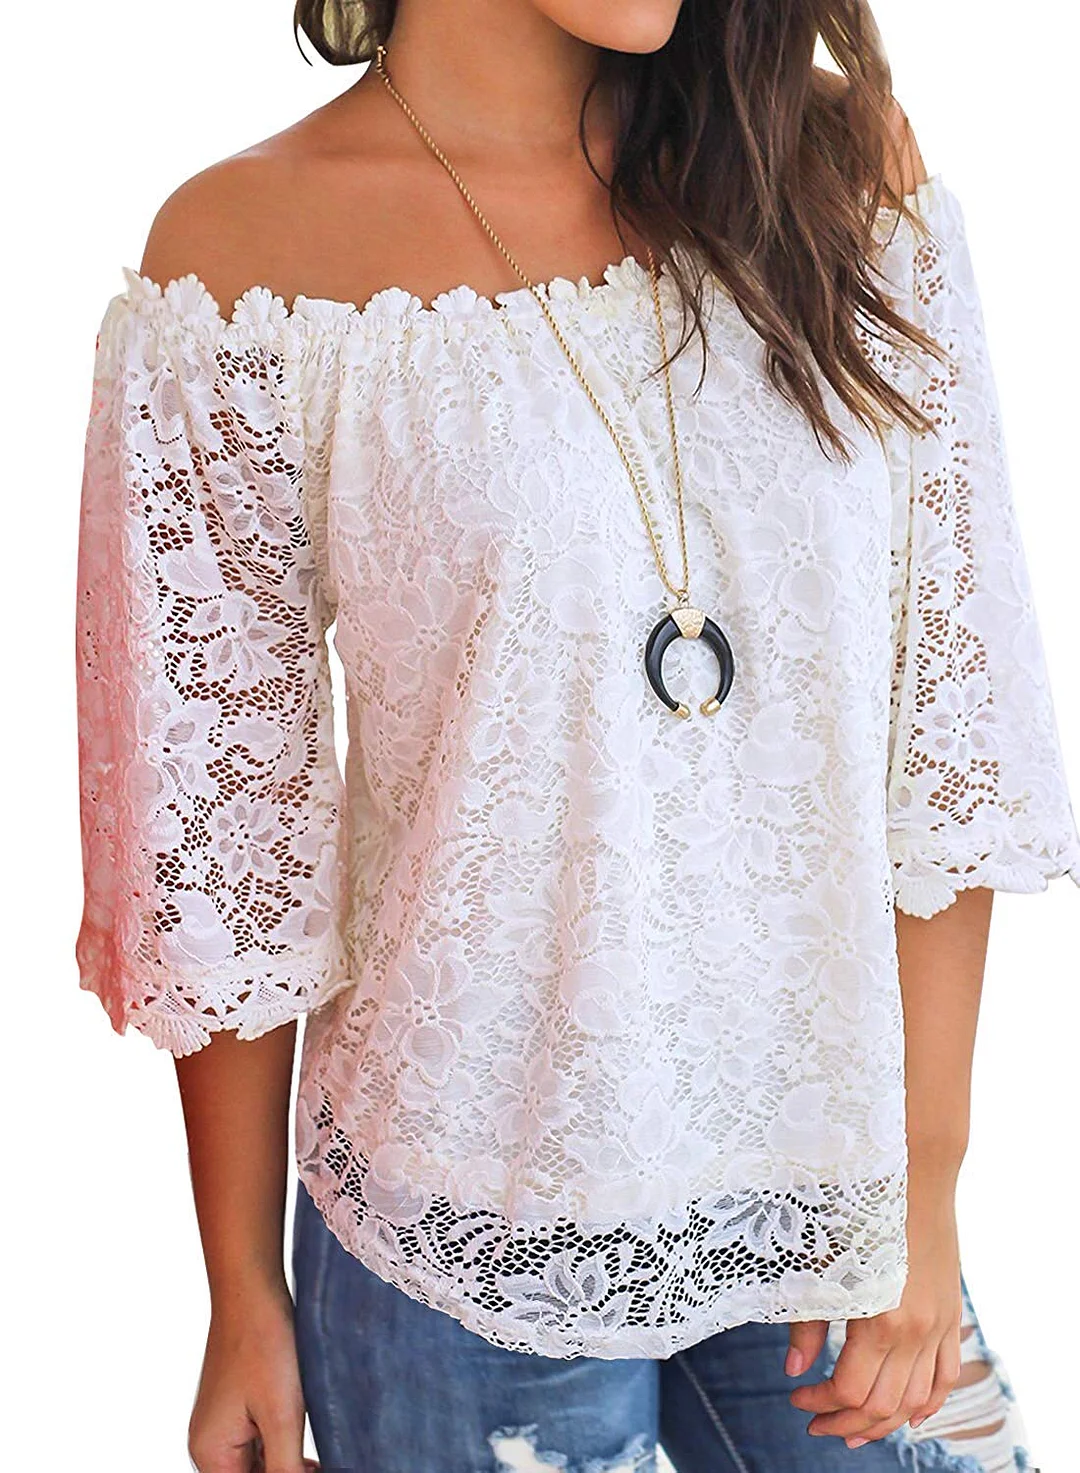 Women's Lace Off Shoulder Tops Casual Loose Blouse Shirts